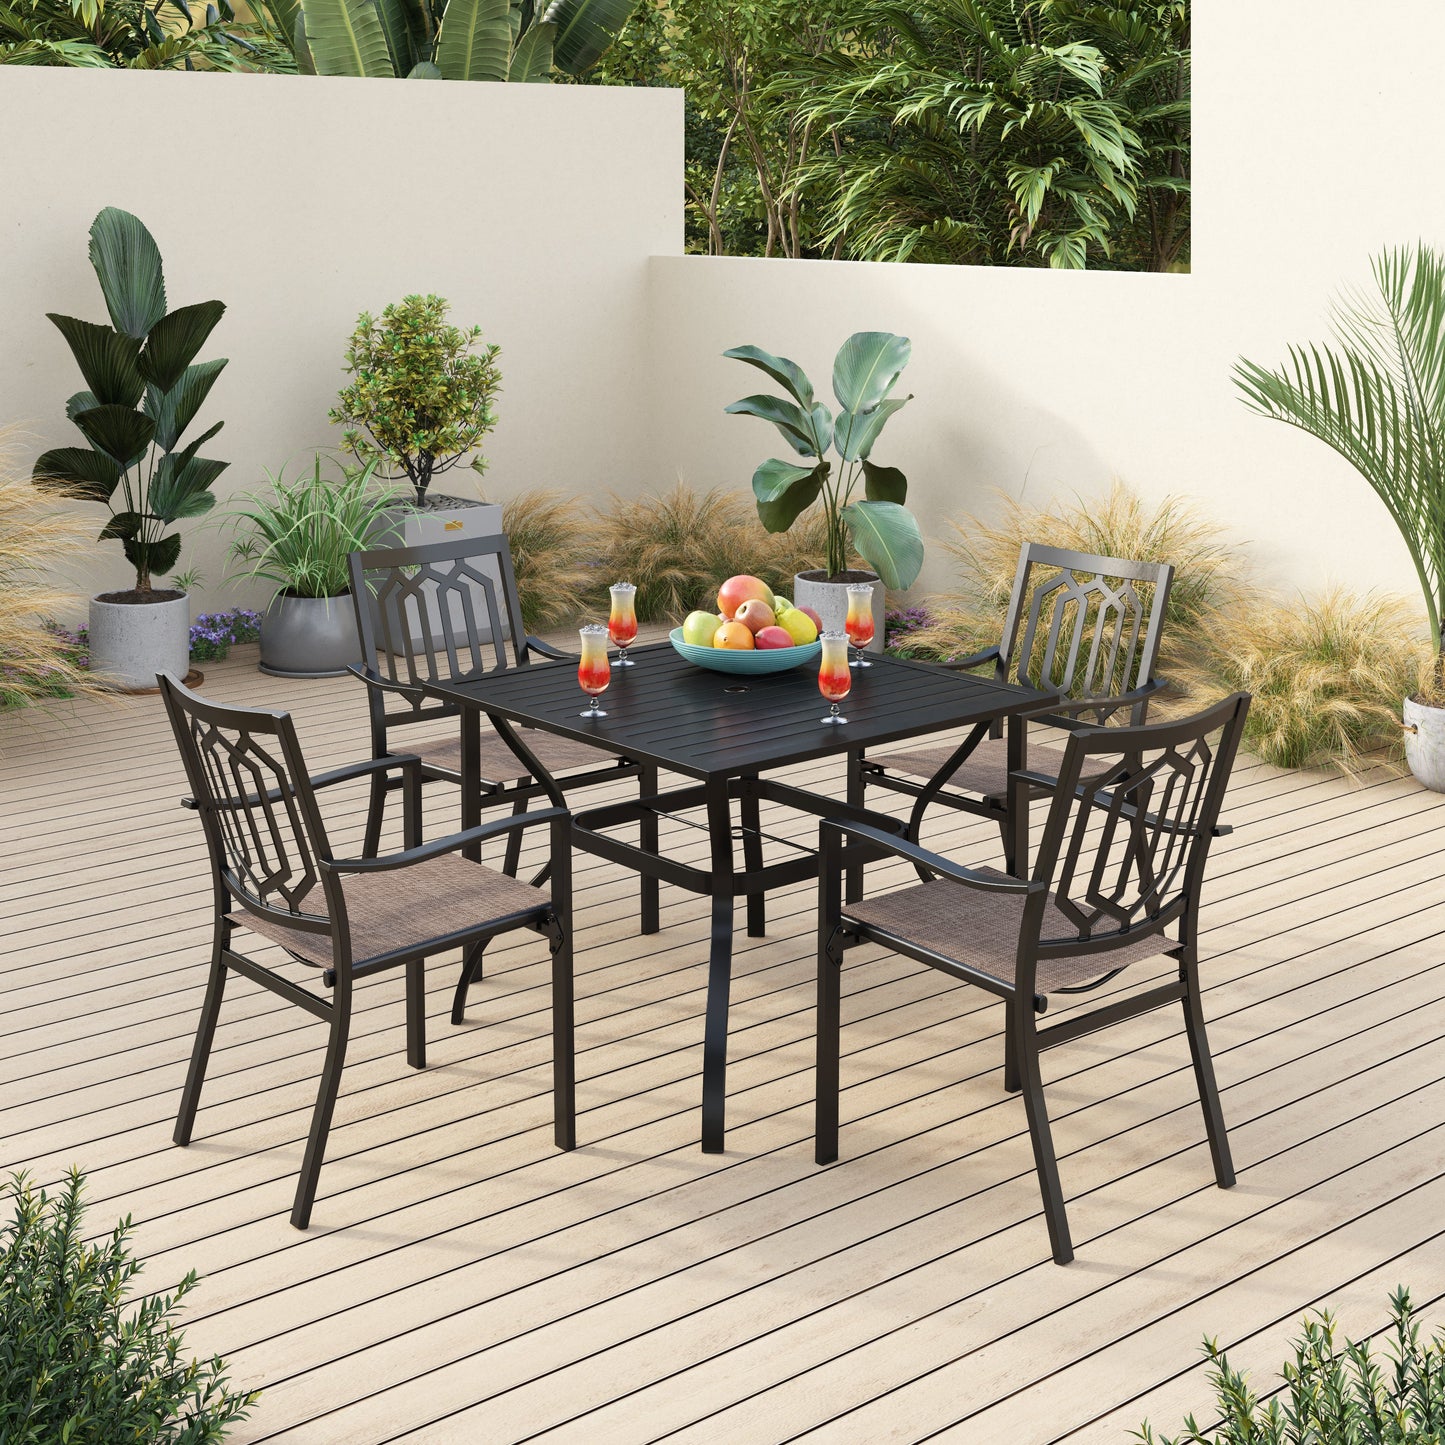 Sophia & William 5 Piece Patio Metal Dining Set Square Table and 4 Textilene Chairs